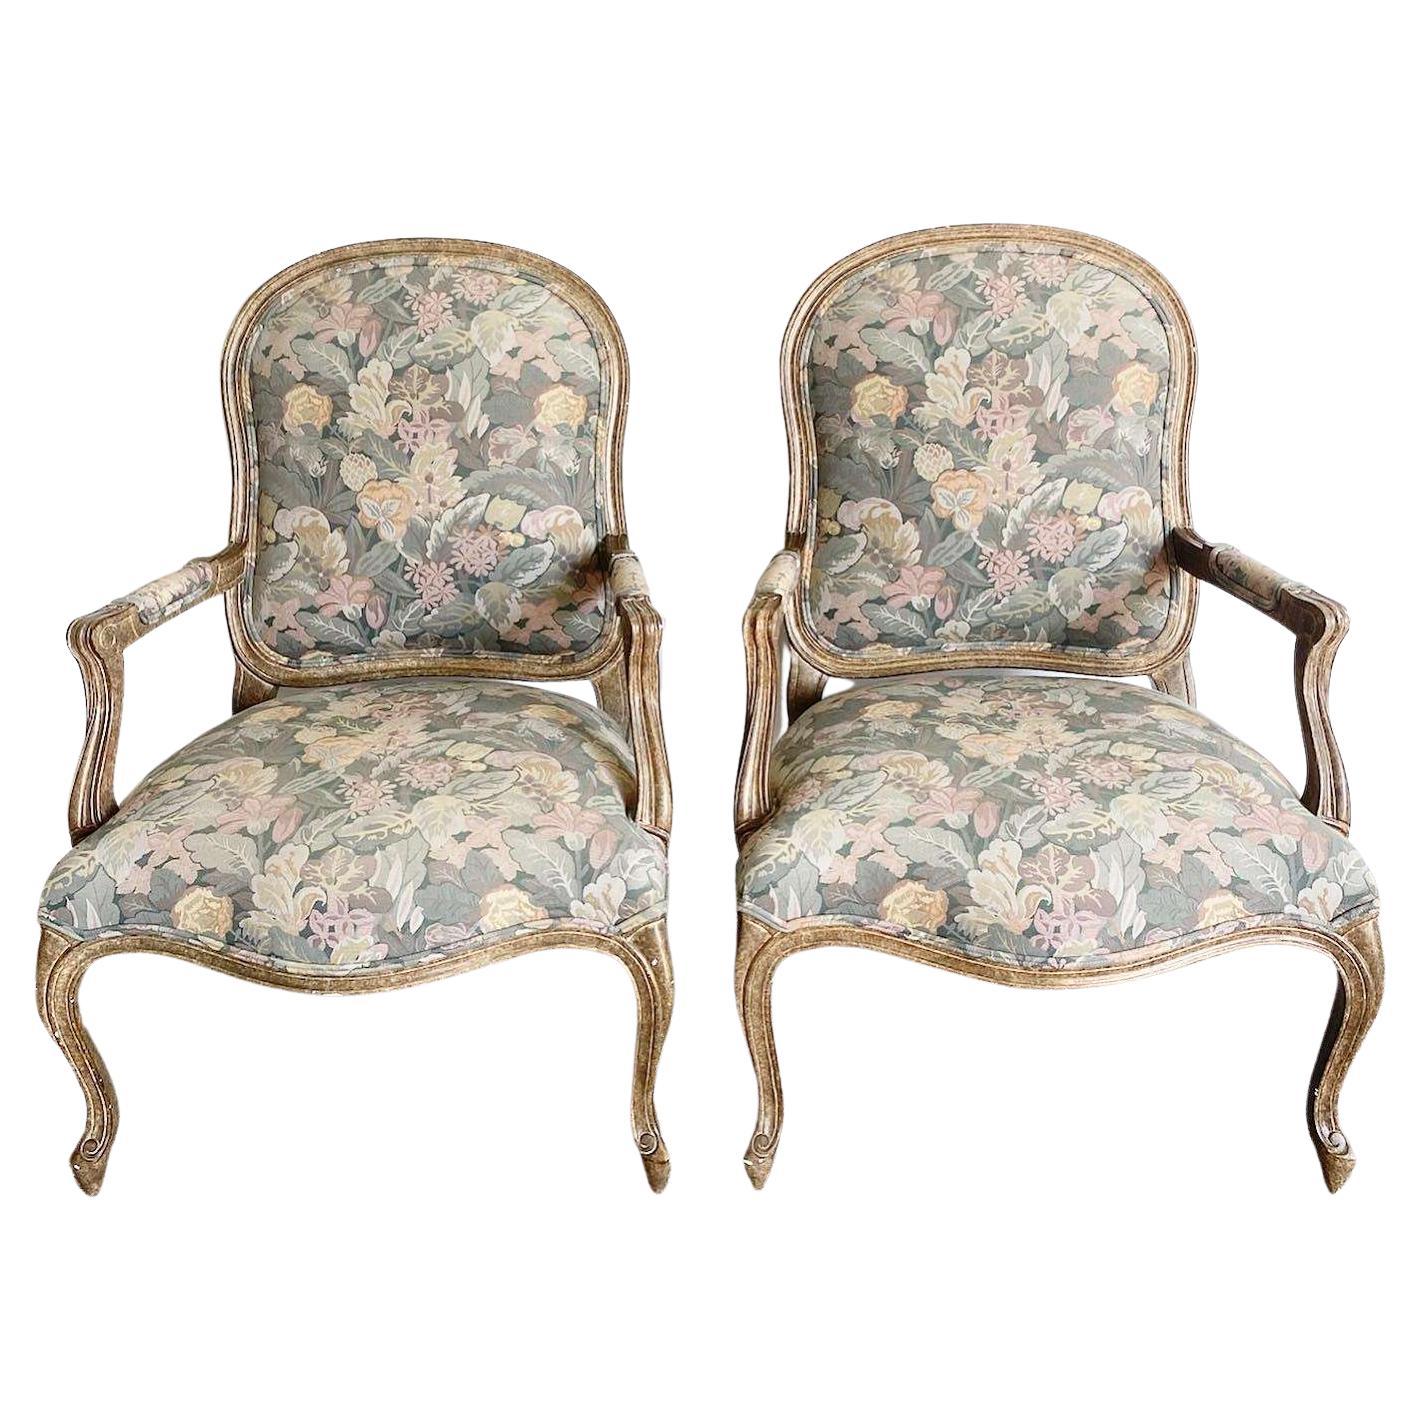 Vintage Regency Upholstered Arm Chairs - a Pair